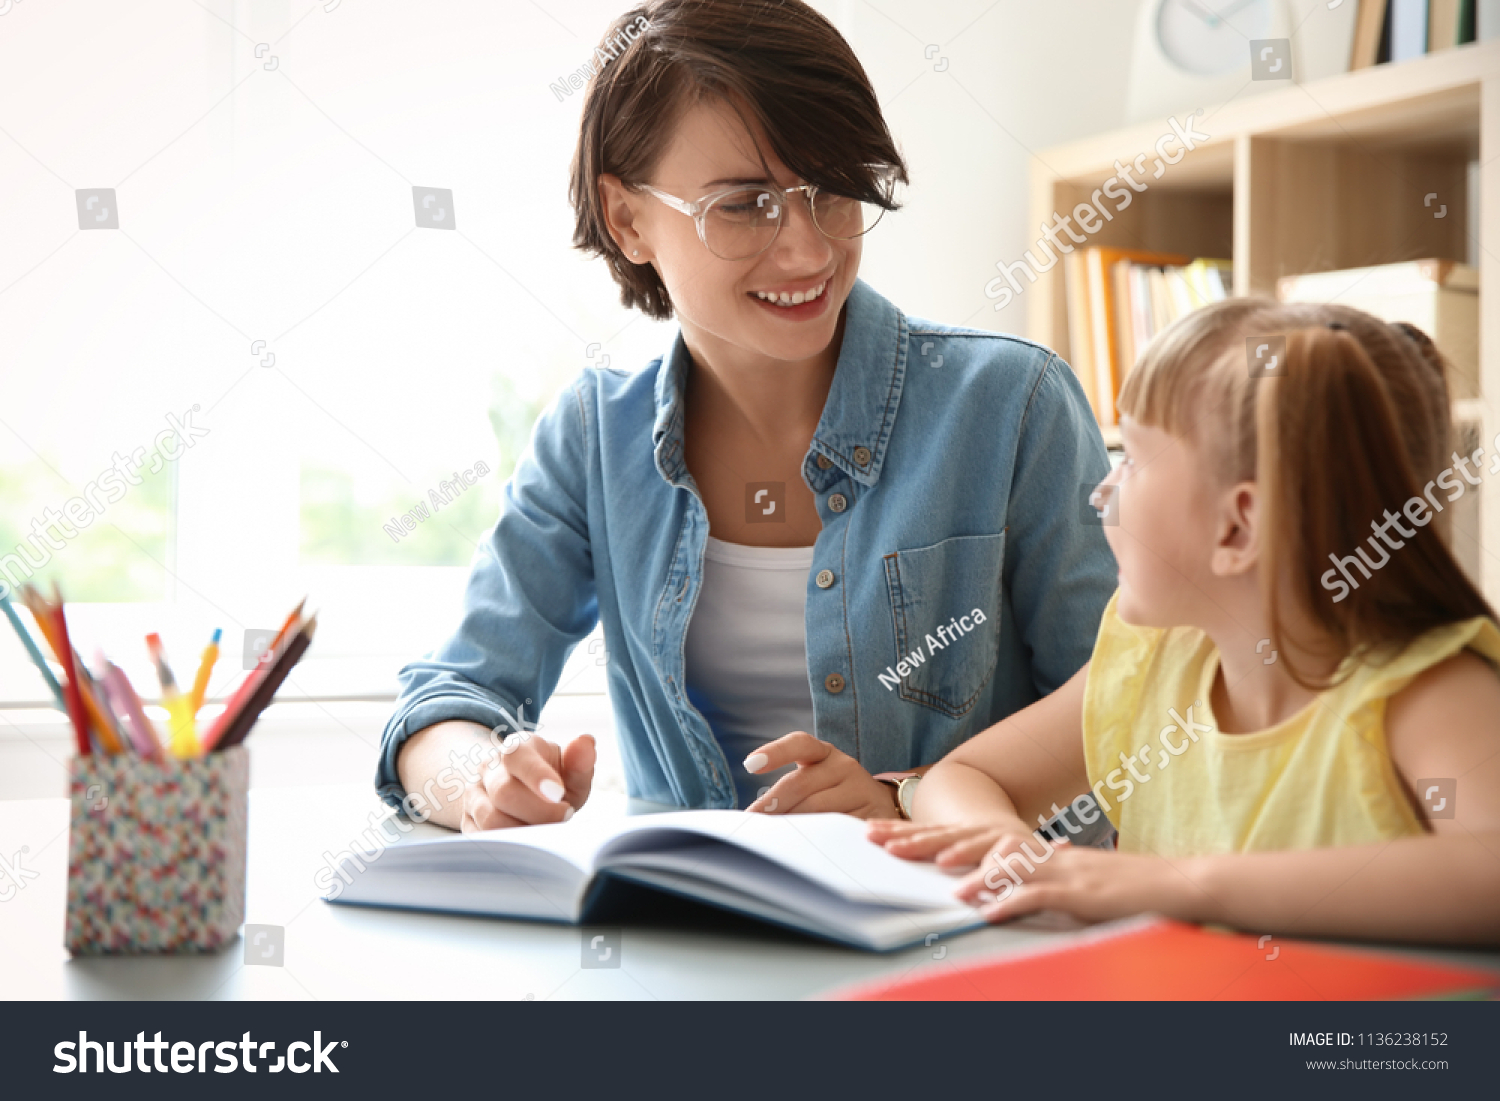 helping a child with assignment